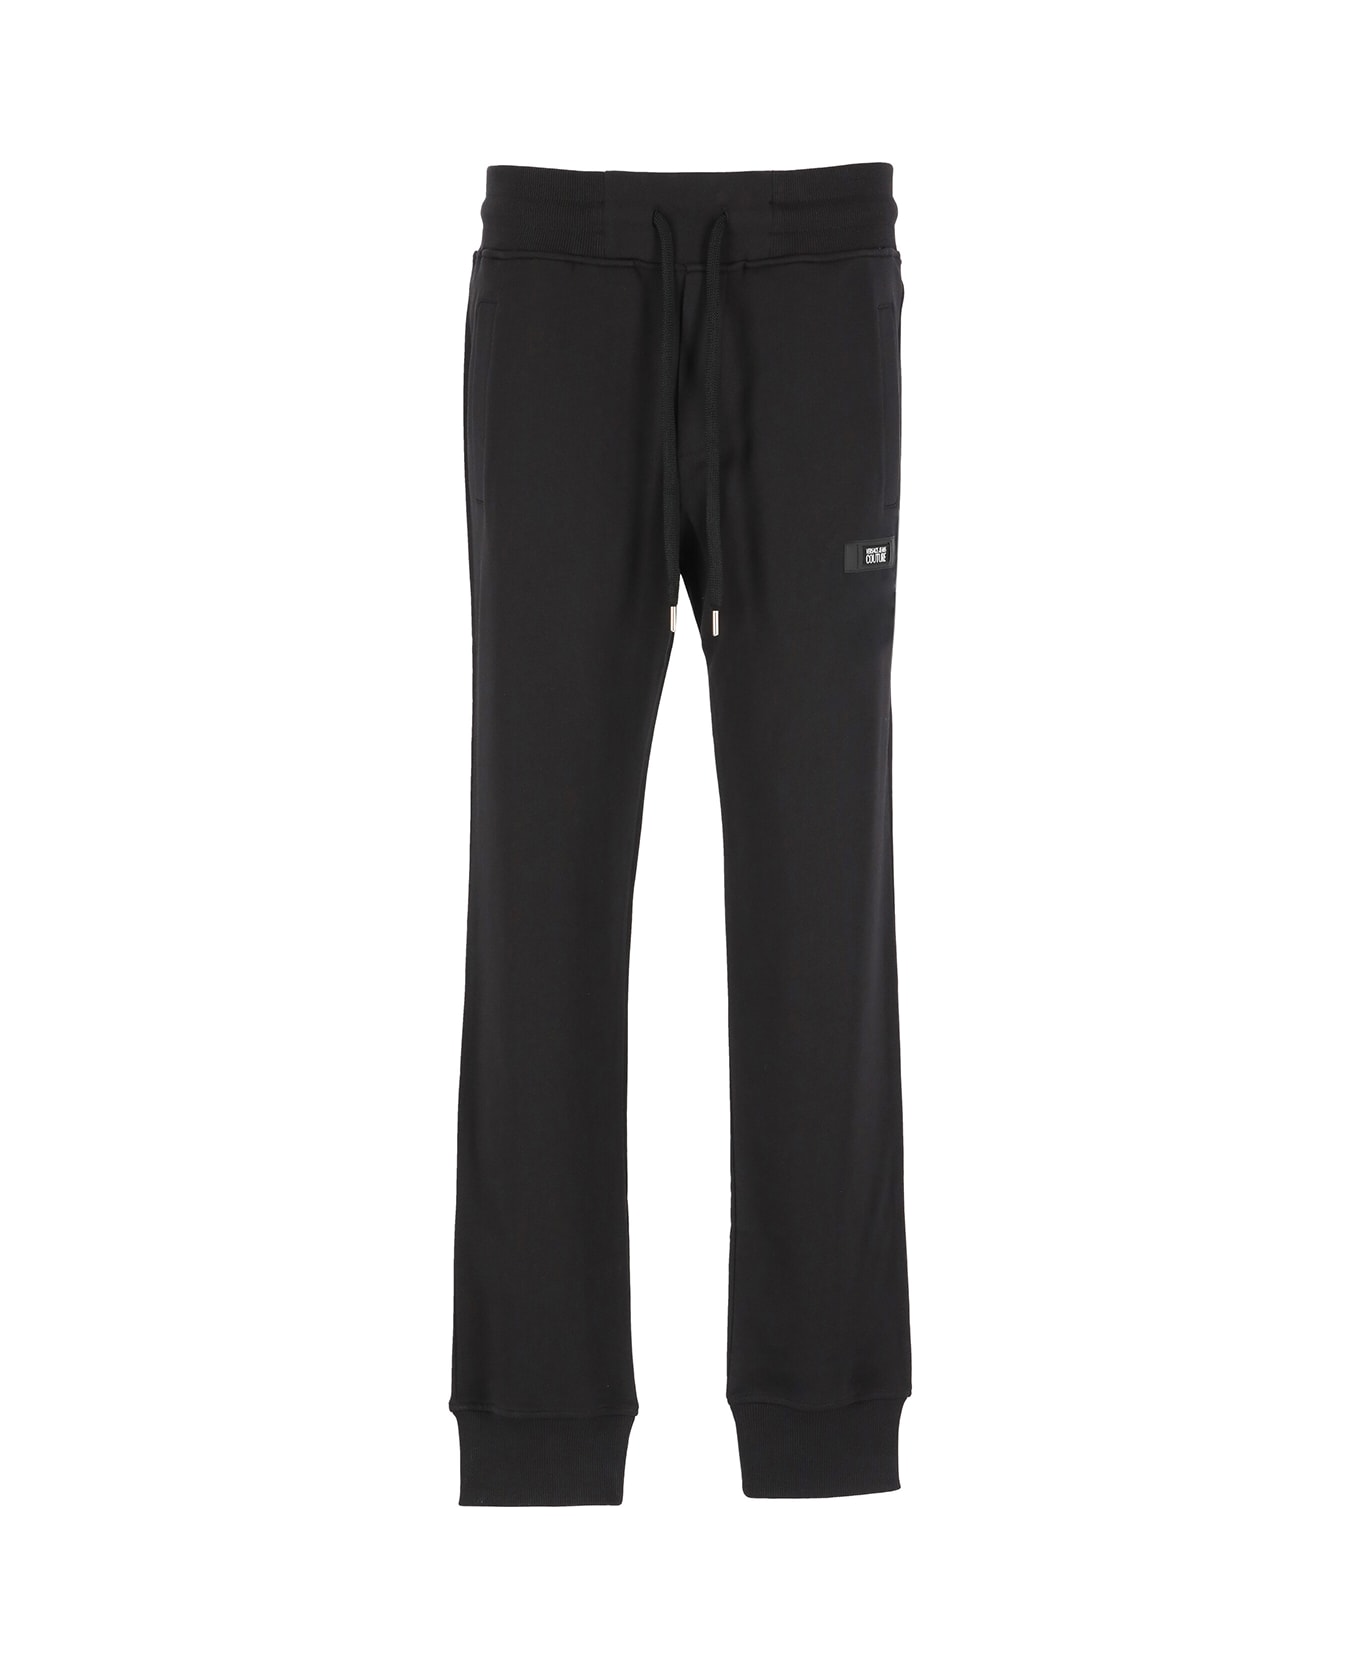 Versace Jeans Couture Sweatpants With Logo Patch - Black